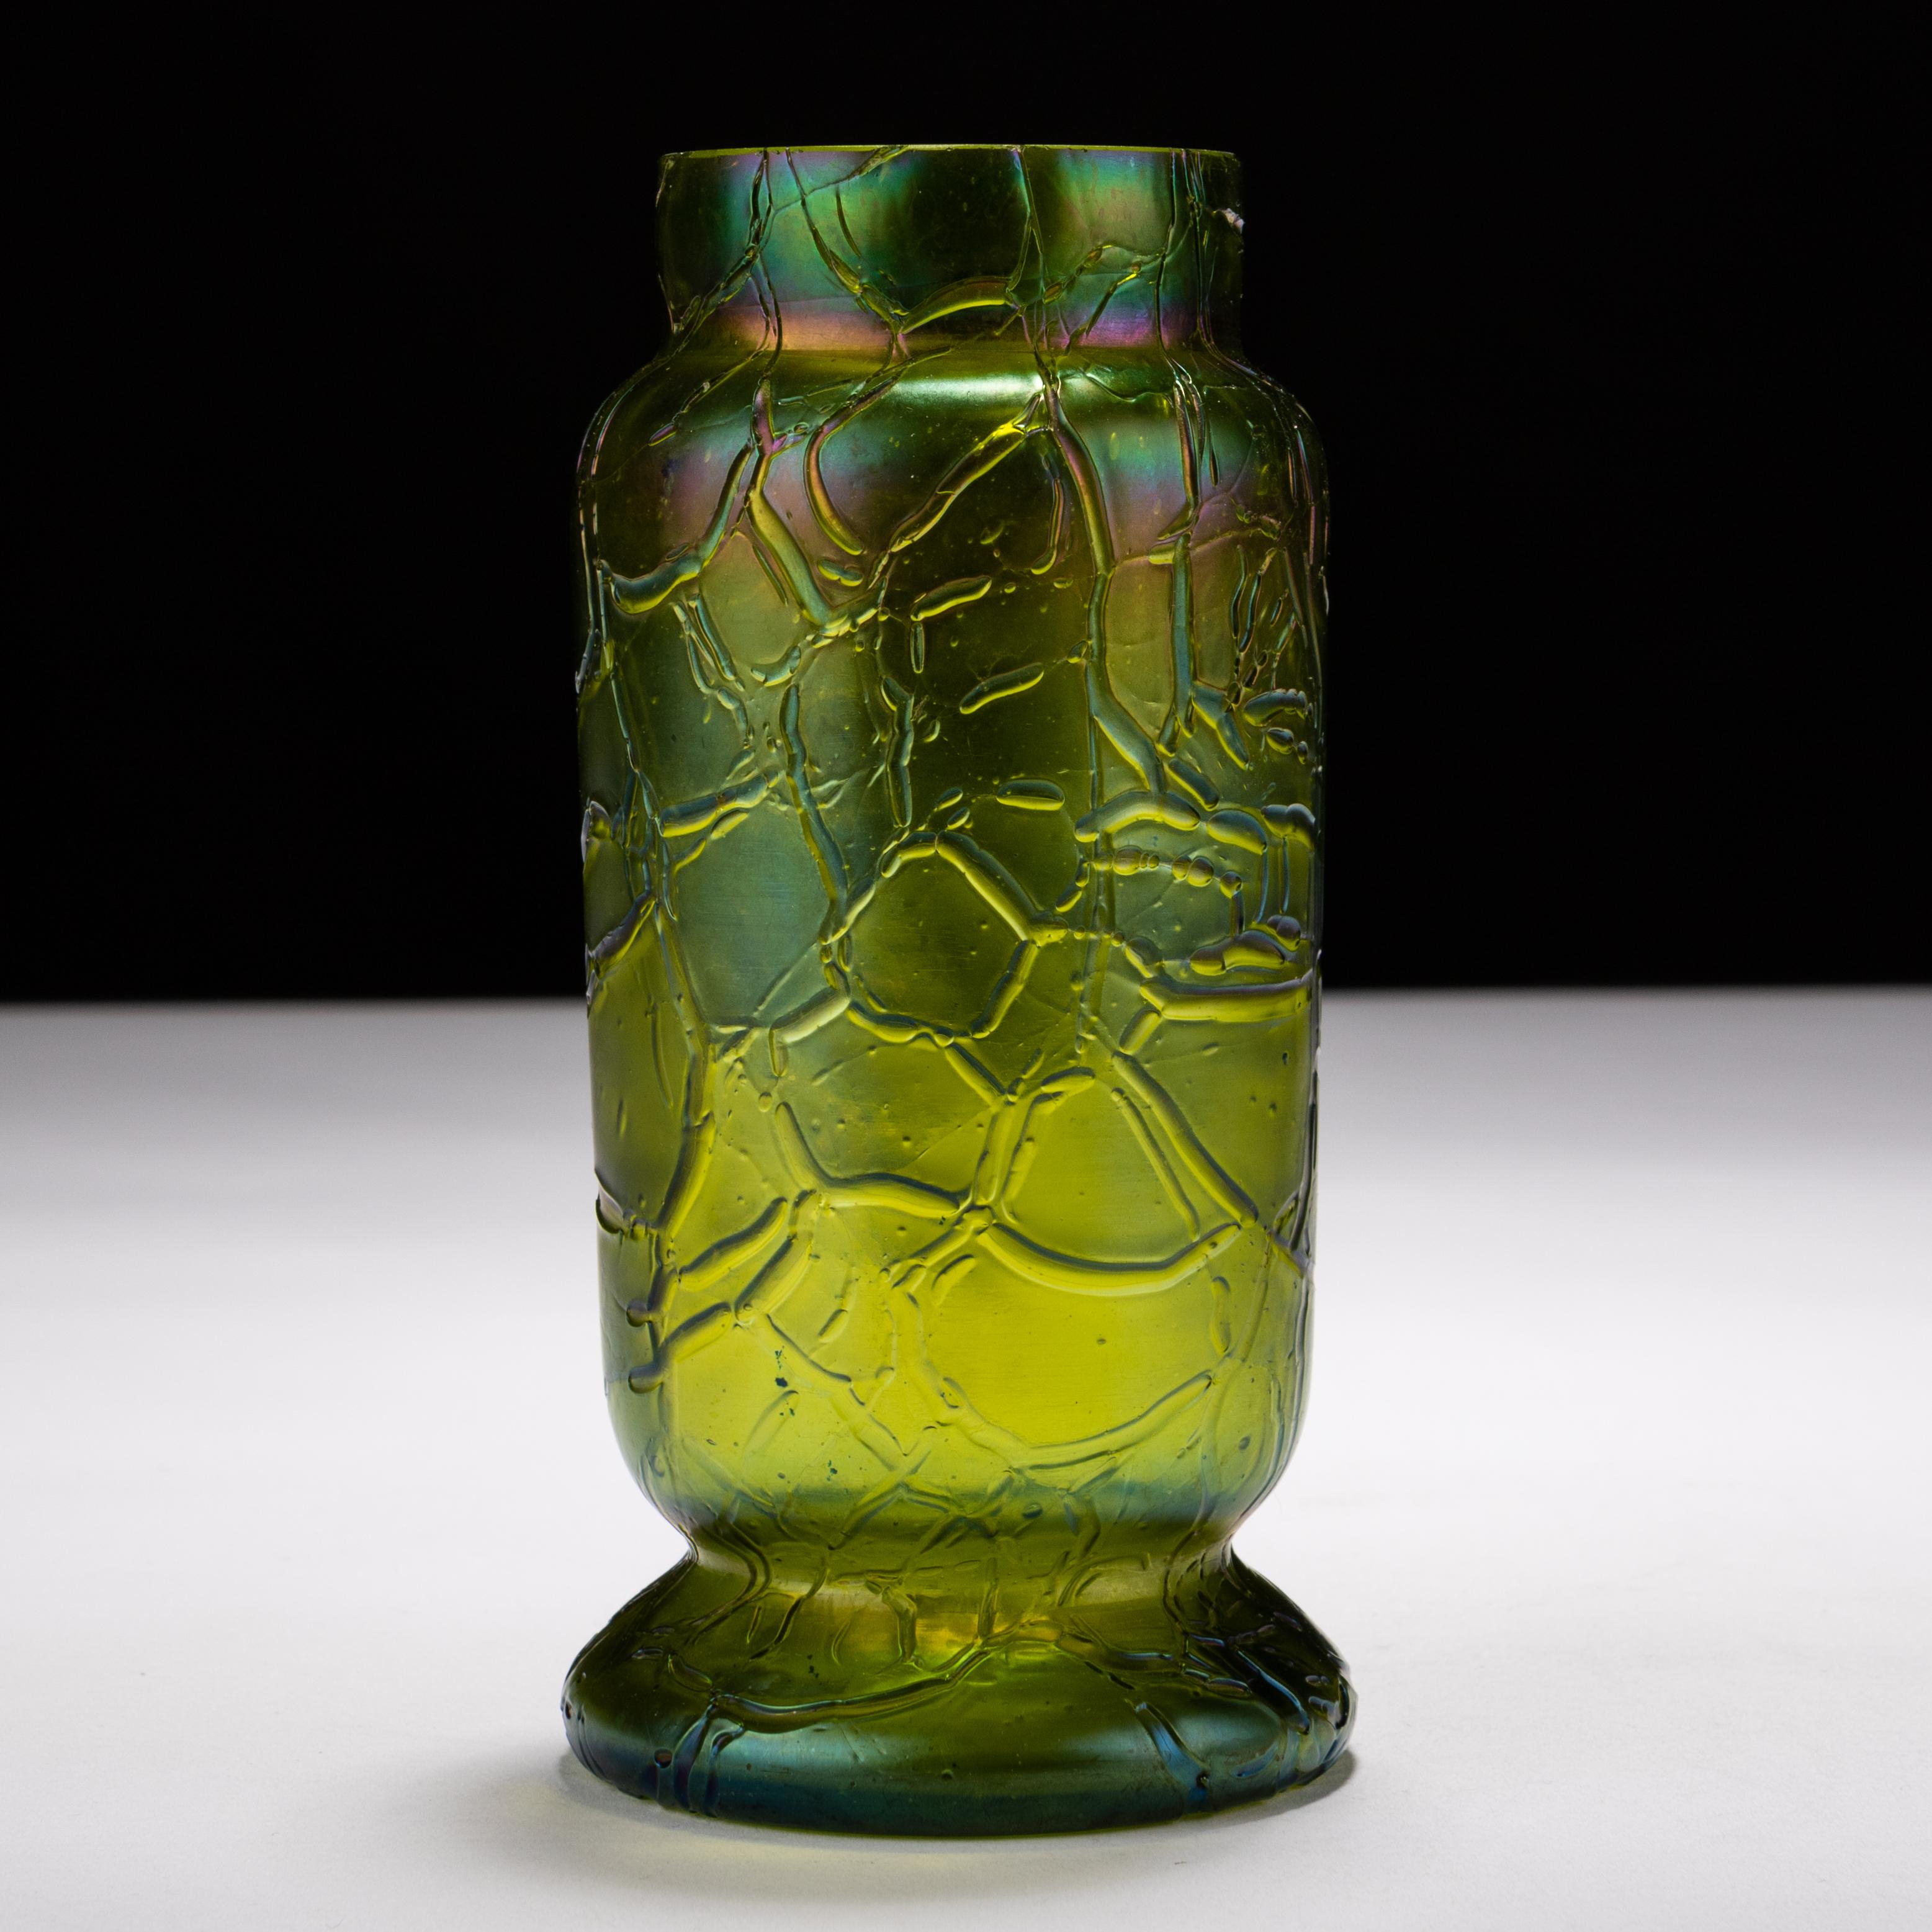 Kralik Loetz Bohemian Iridescent Glass Vase ca. 1900 
Very good condition
From a private collection
Free international shipping